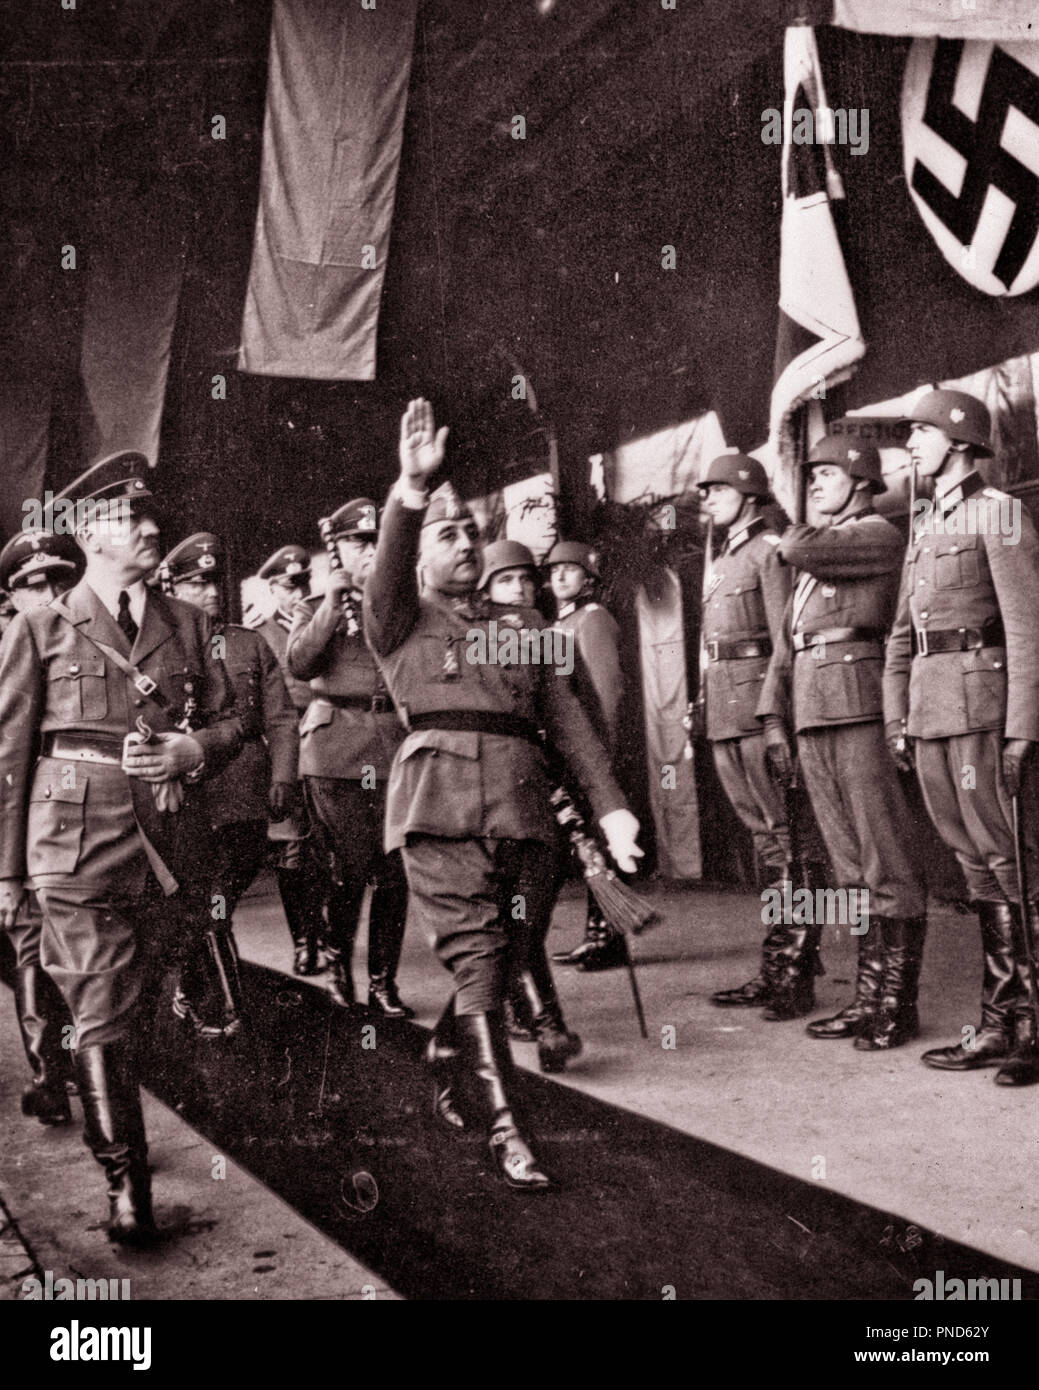 1940 OCTOBER 23 HITLER MARCHES AS FRANCO SALUTES DURING HITLER’S TRIP TO SPAIN ITALY AND FRANCE FROM VON RIBBENTROP PHOTO ALBUM - q74015 CPC001 HARS NATIONALISM POWERFUL WORLD WARS ITALY WORLD WAR WORLD WAR TWO WORLD WAR II DICTATOR SWASTIKA OCCUPATIONS POLITICS UNIFORMS NAZI VISIT WORLD WAR 2 FASCIST ADOLF HITLER PHOTO ALBUM FASCISM TOGETHERNESS BLACK AND WHITE CAUCASIAN ETHNICITY DURING OLD FASHIONED Stock Photo